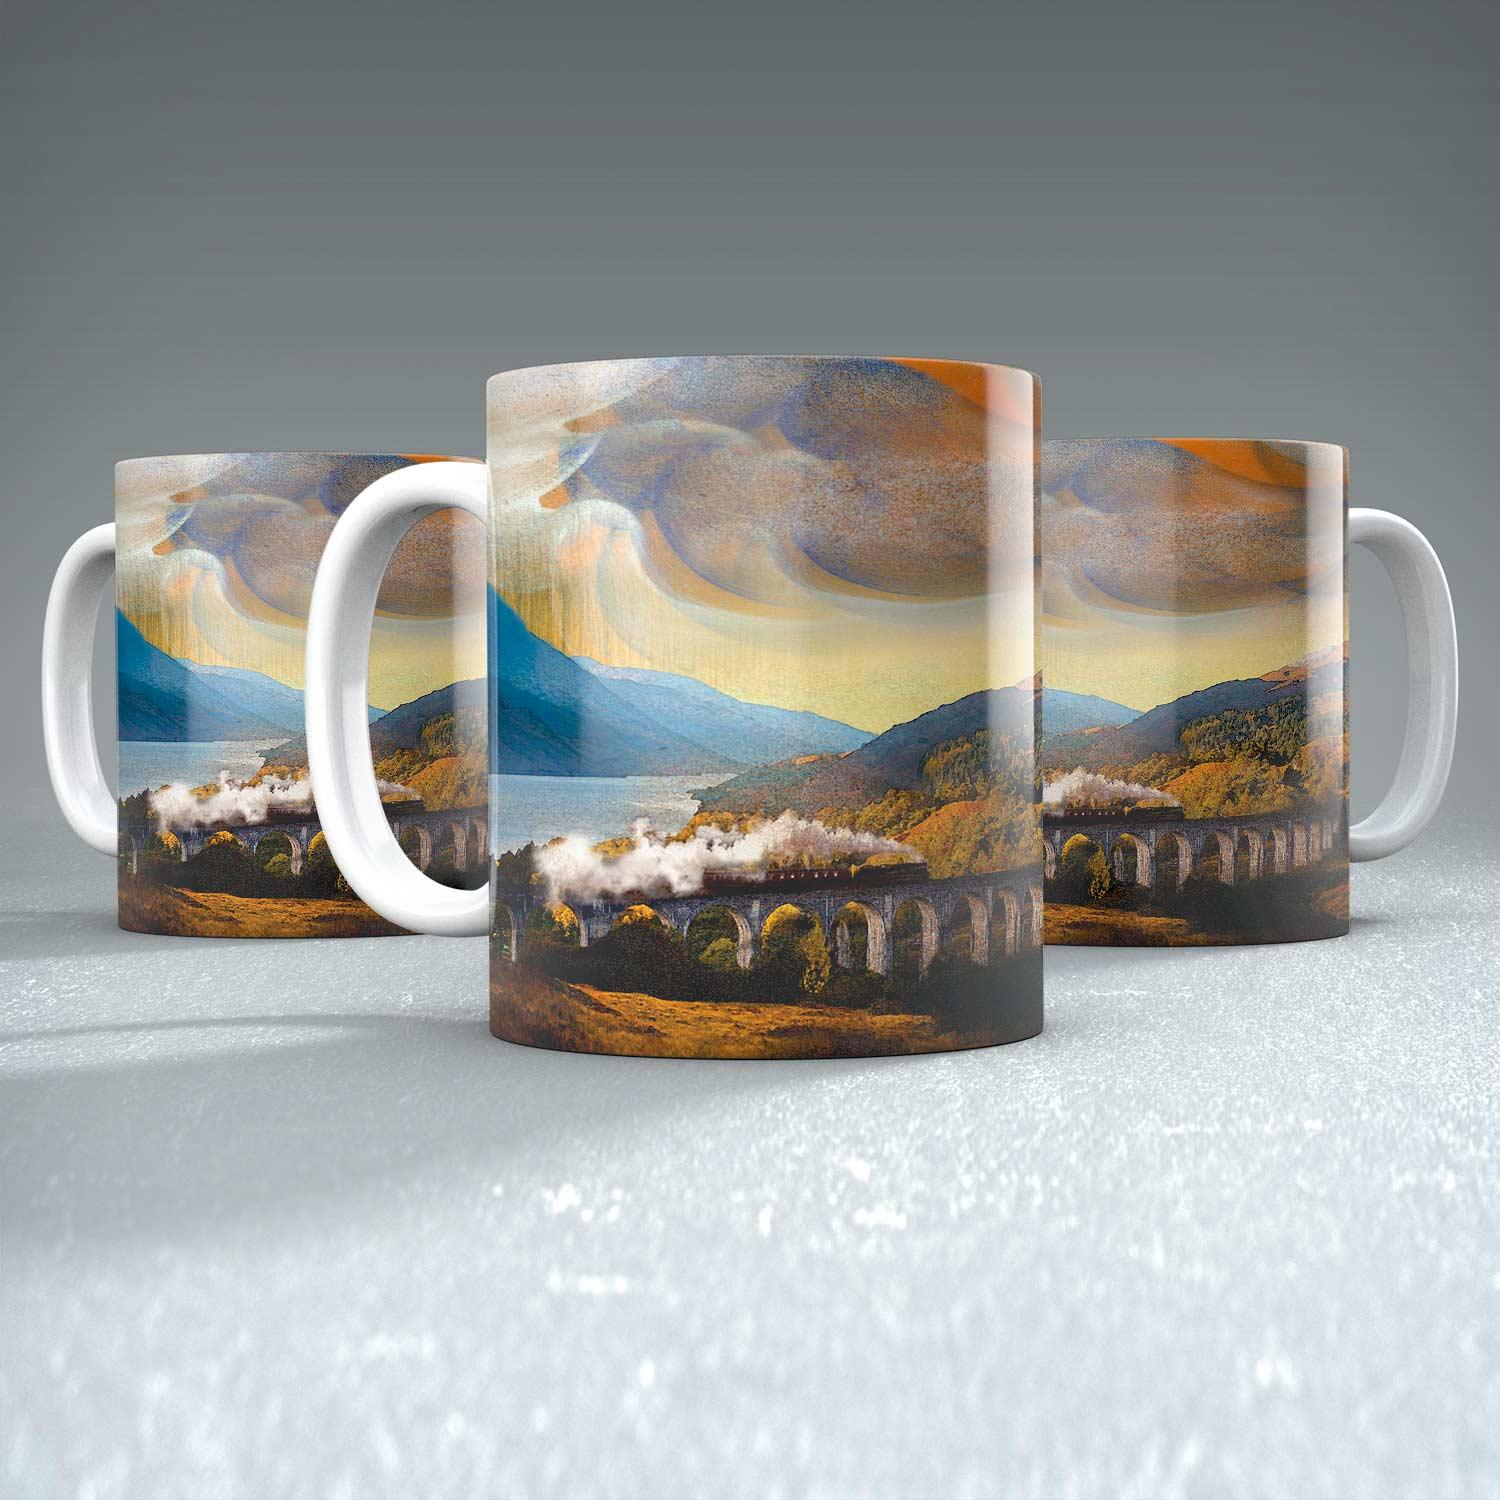 Steemin’ Up Glenfinnan, Inverness-shire Mug from an original painting by artist Esther Cohen